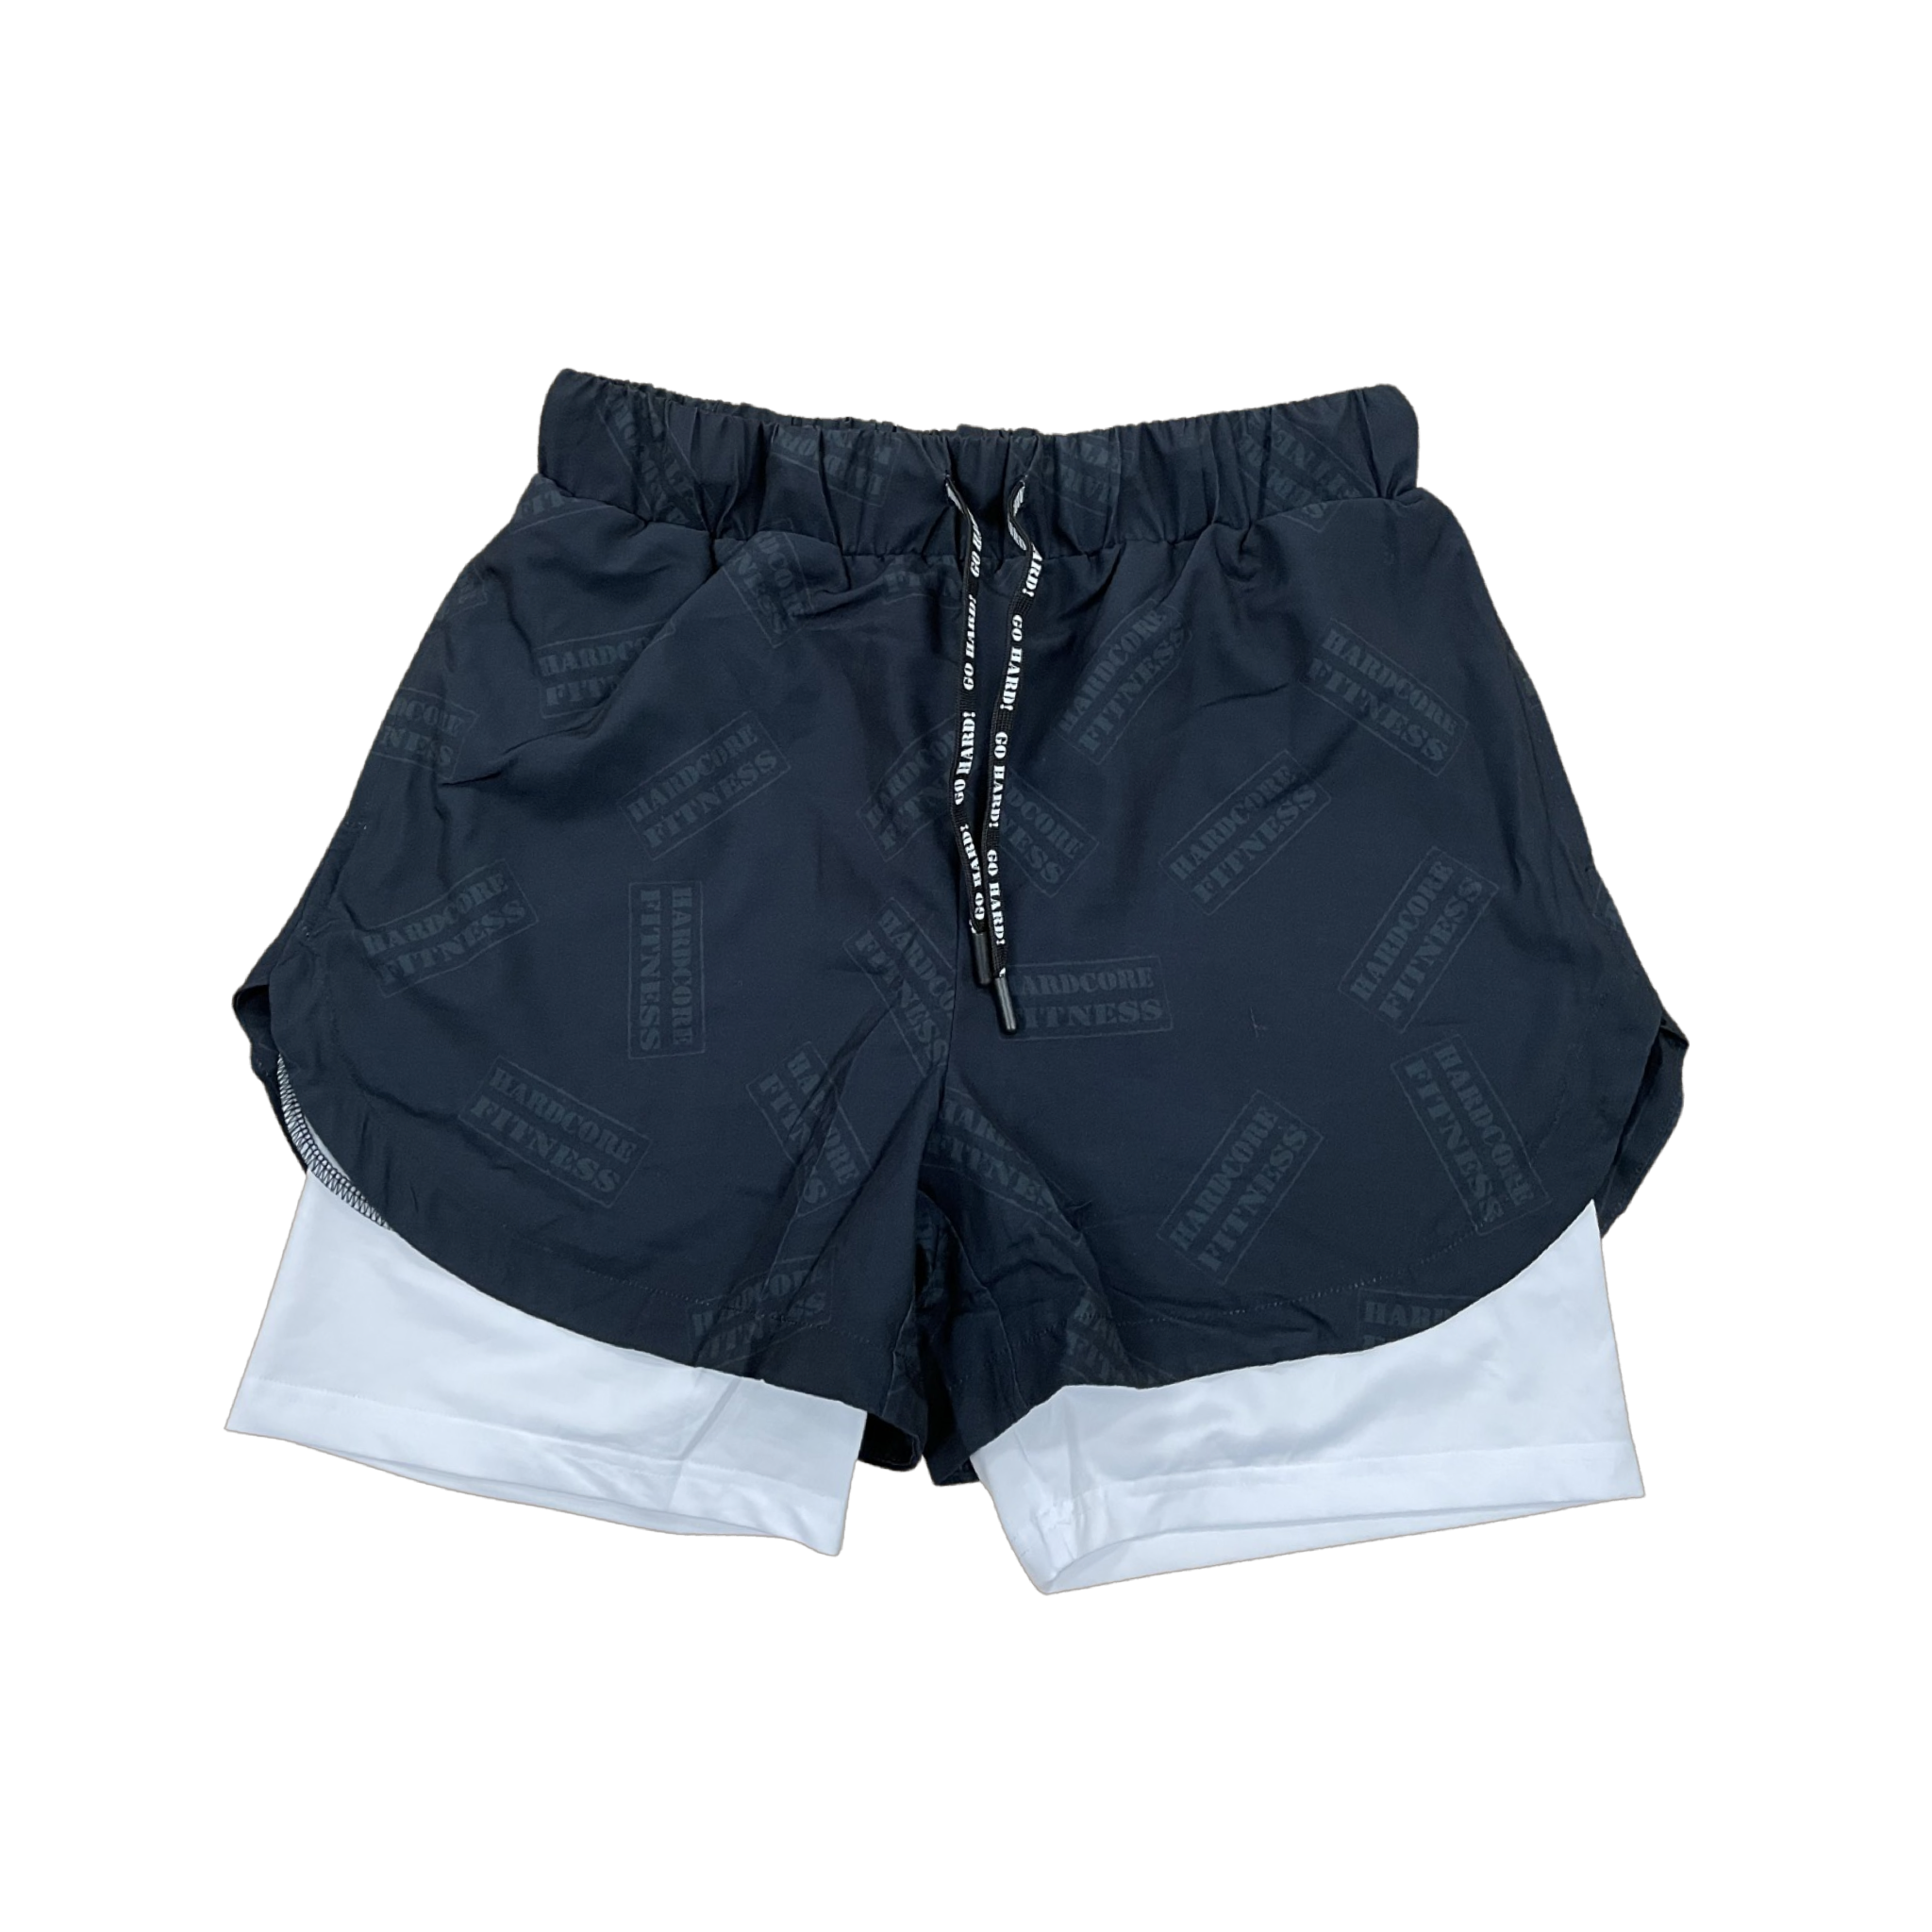 SHORTS - Male - Shorts - Built-In Compression